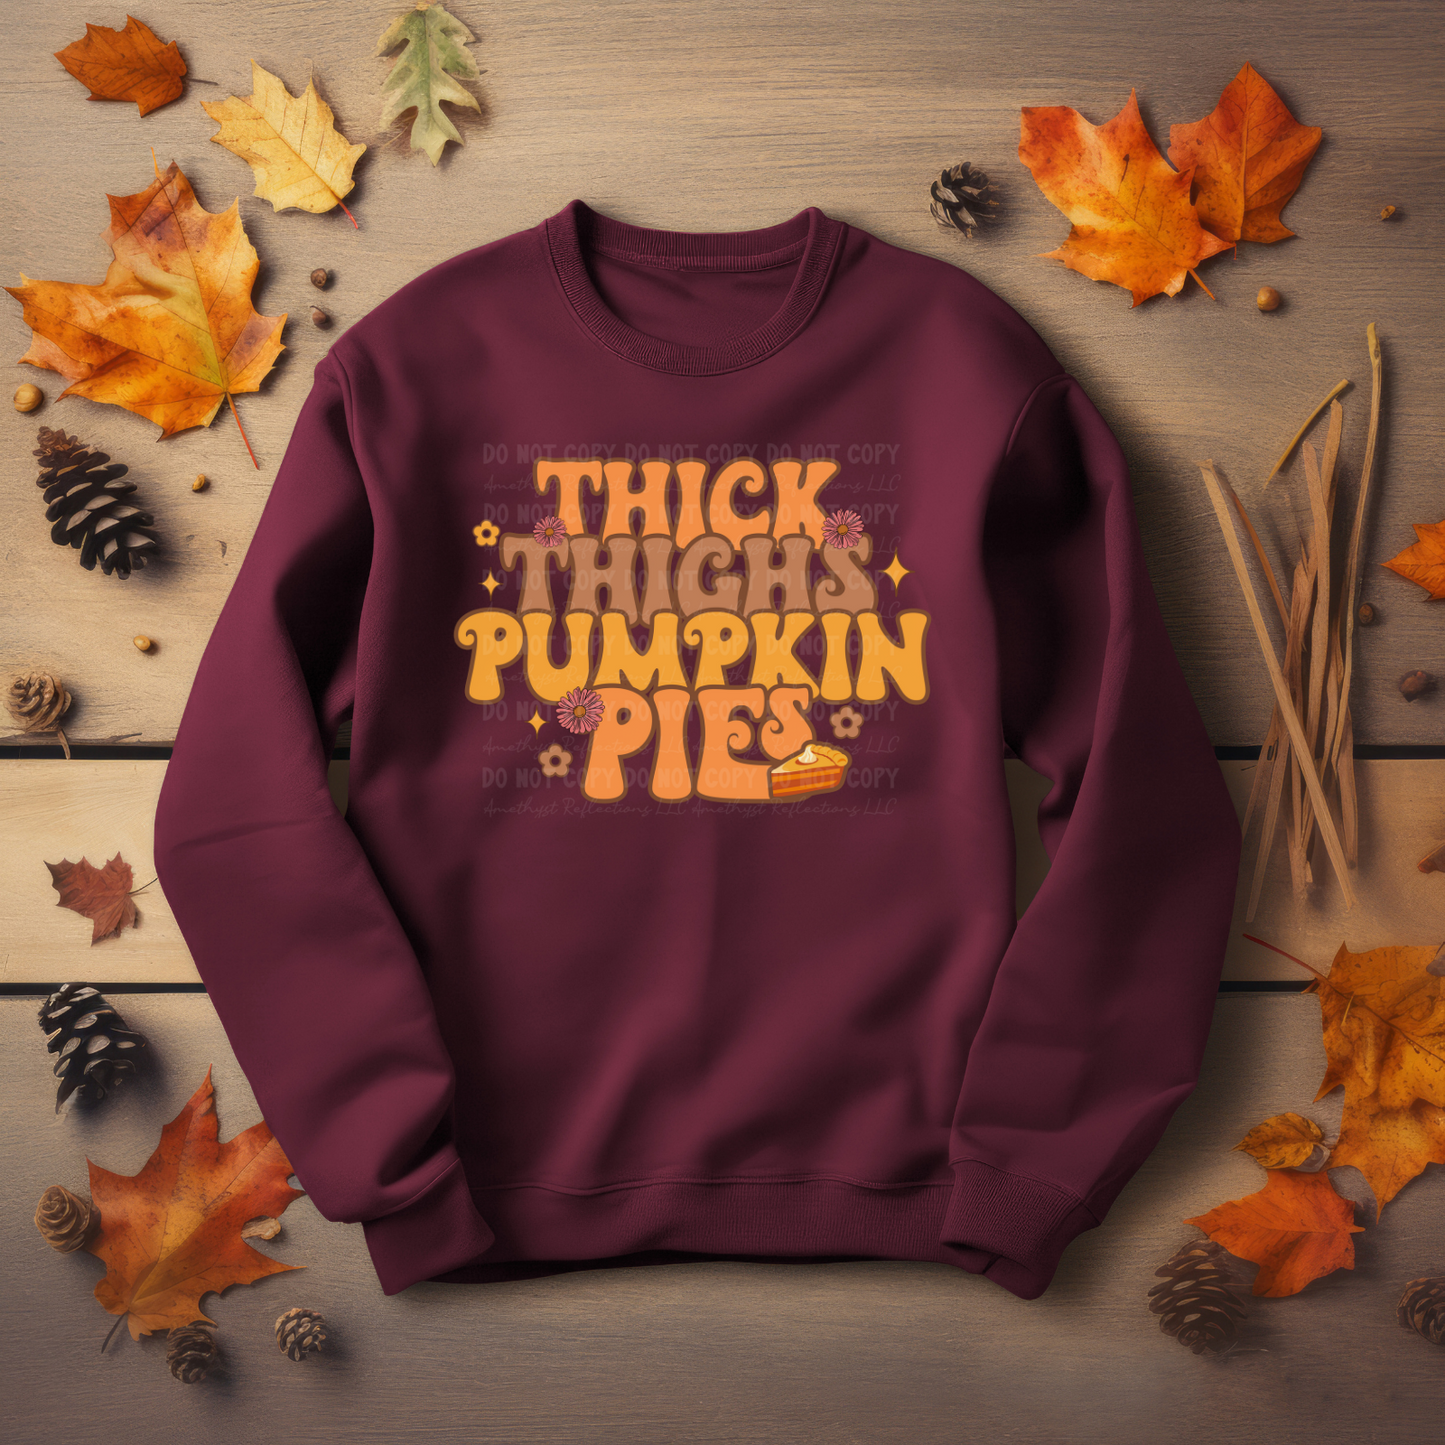 Thick Thighs and Pumpkin Pies Sweatshirt